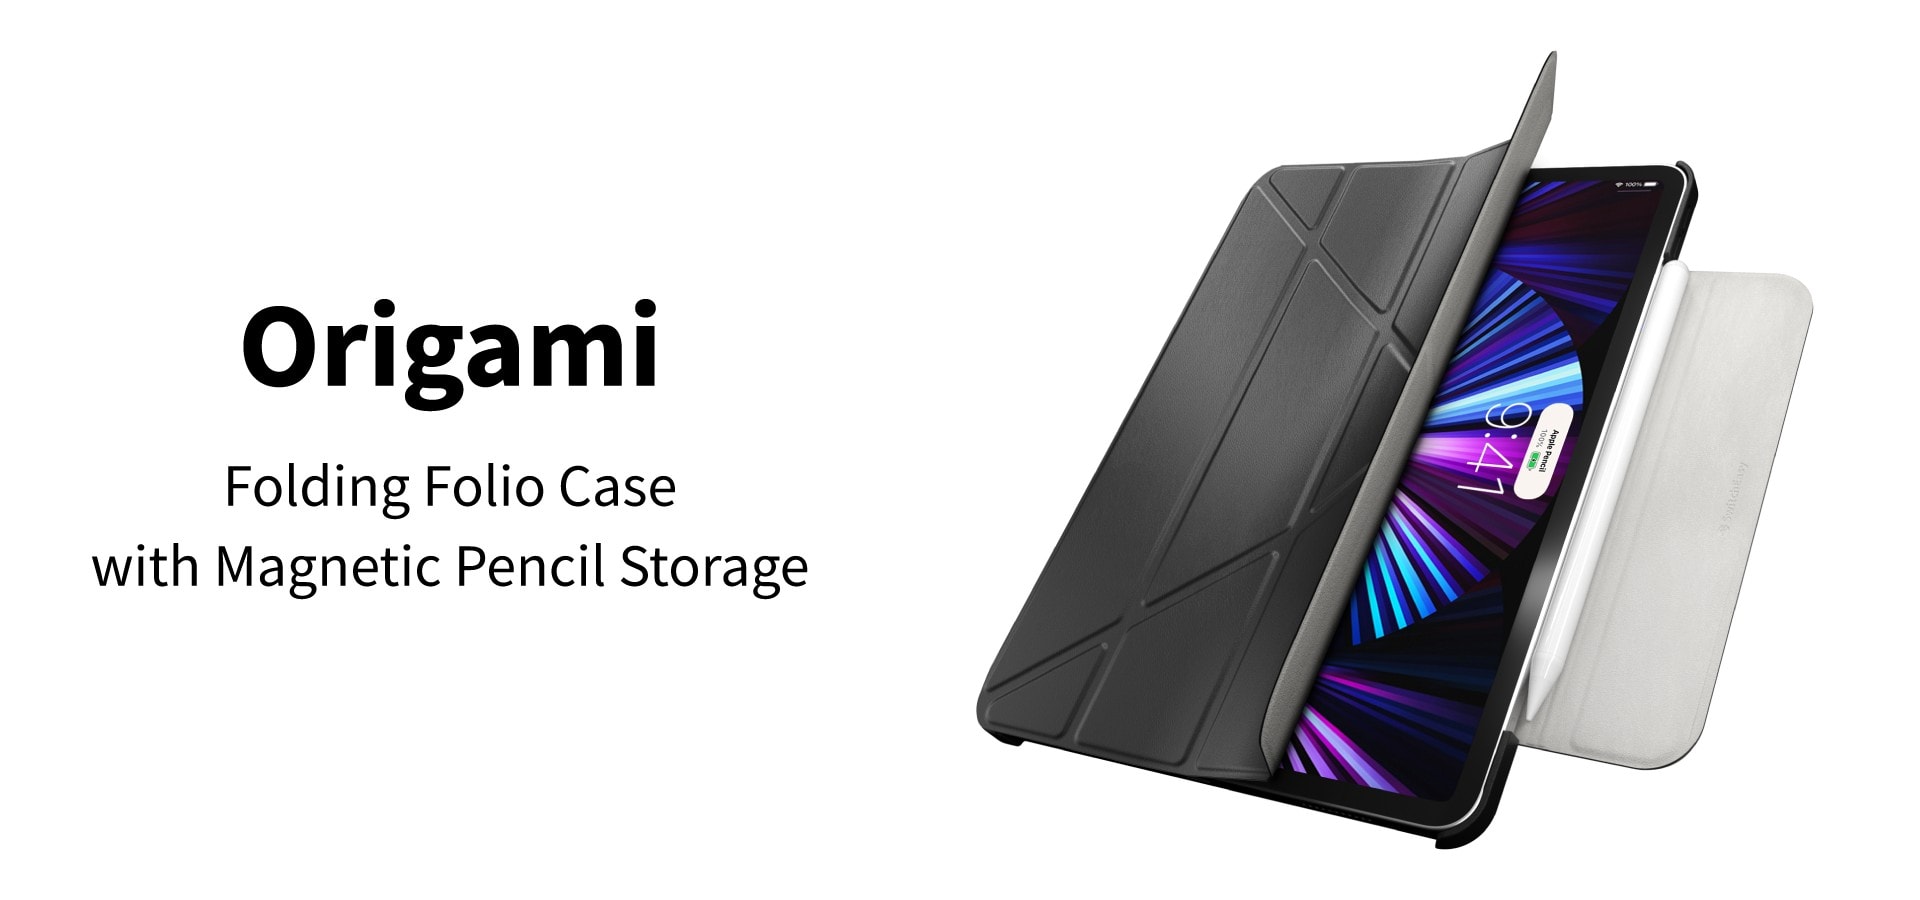 Origami Protective Case giveaway: This unique iPad case folds into a convenient stand